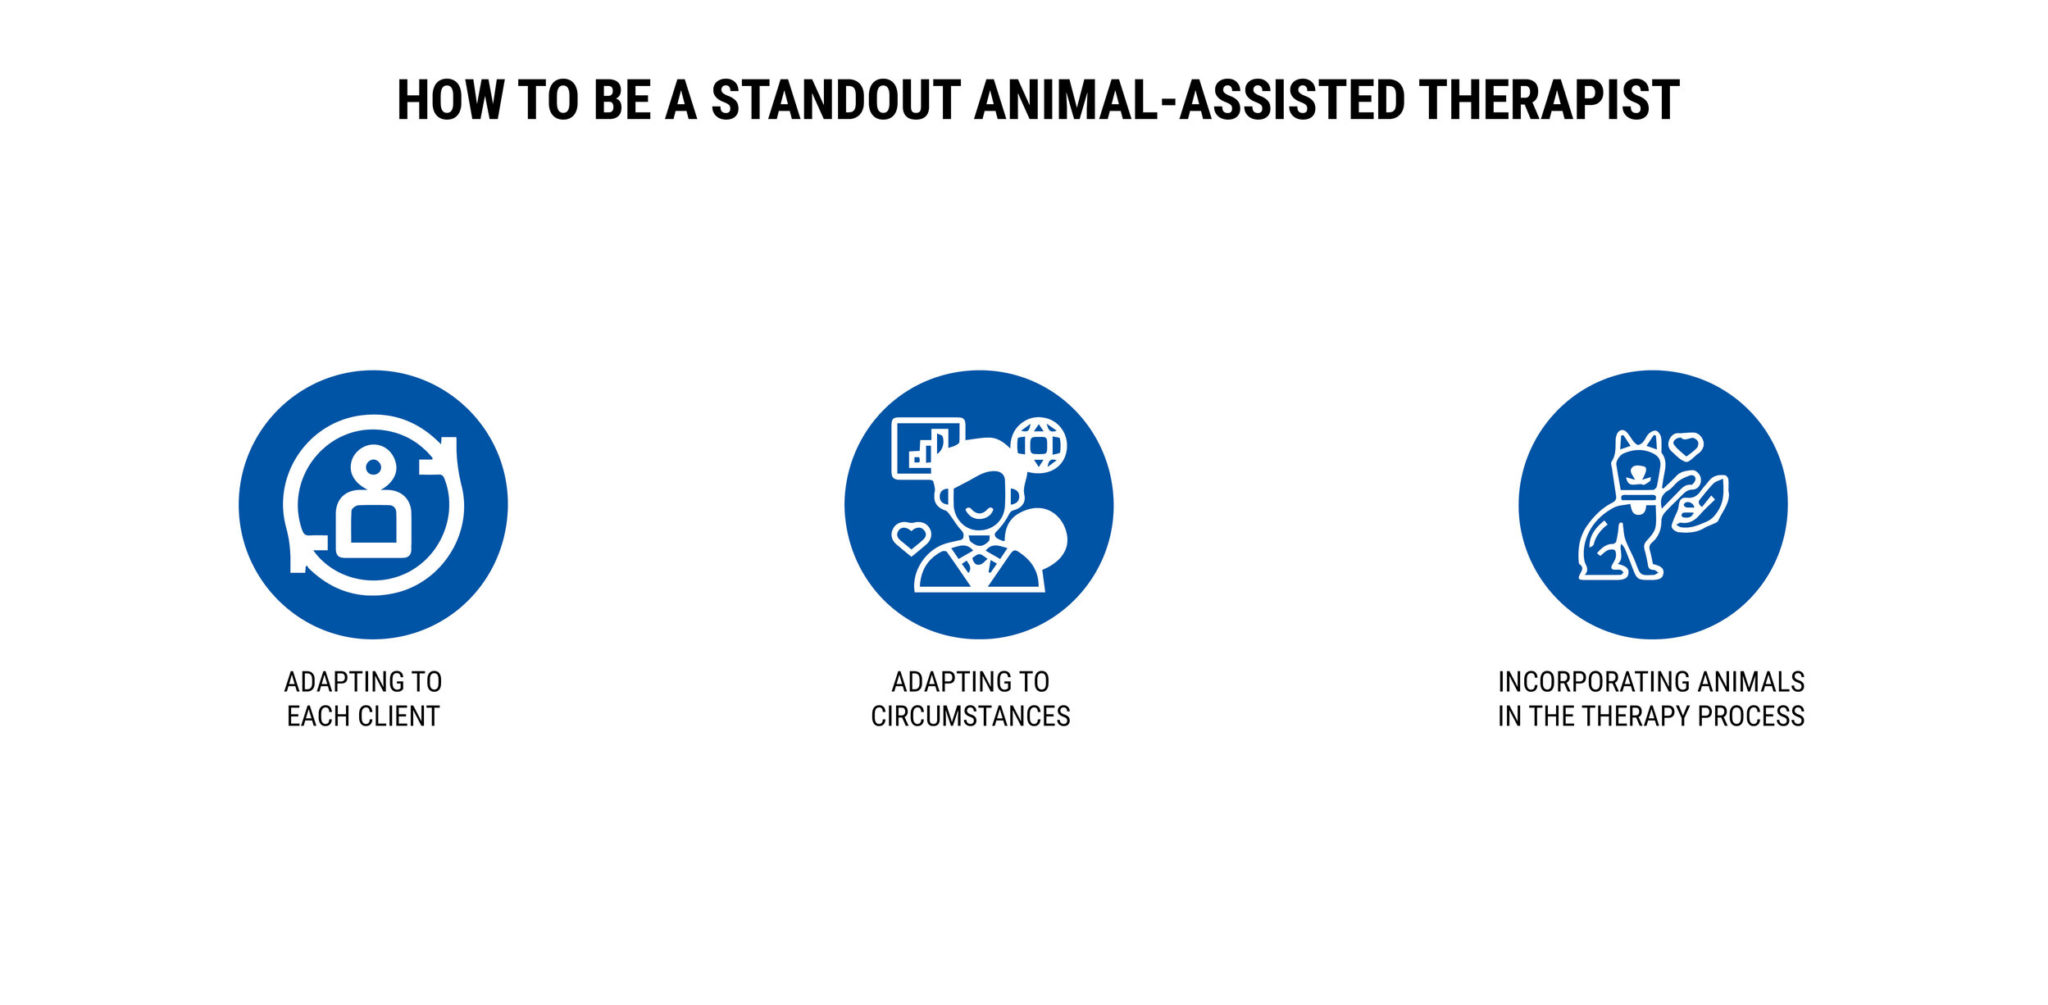 HOW TO BE A STANDOUT ANIMAL-ASSISTED THERAPIST